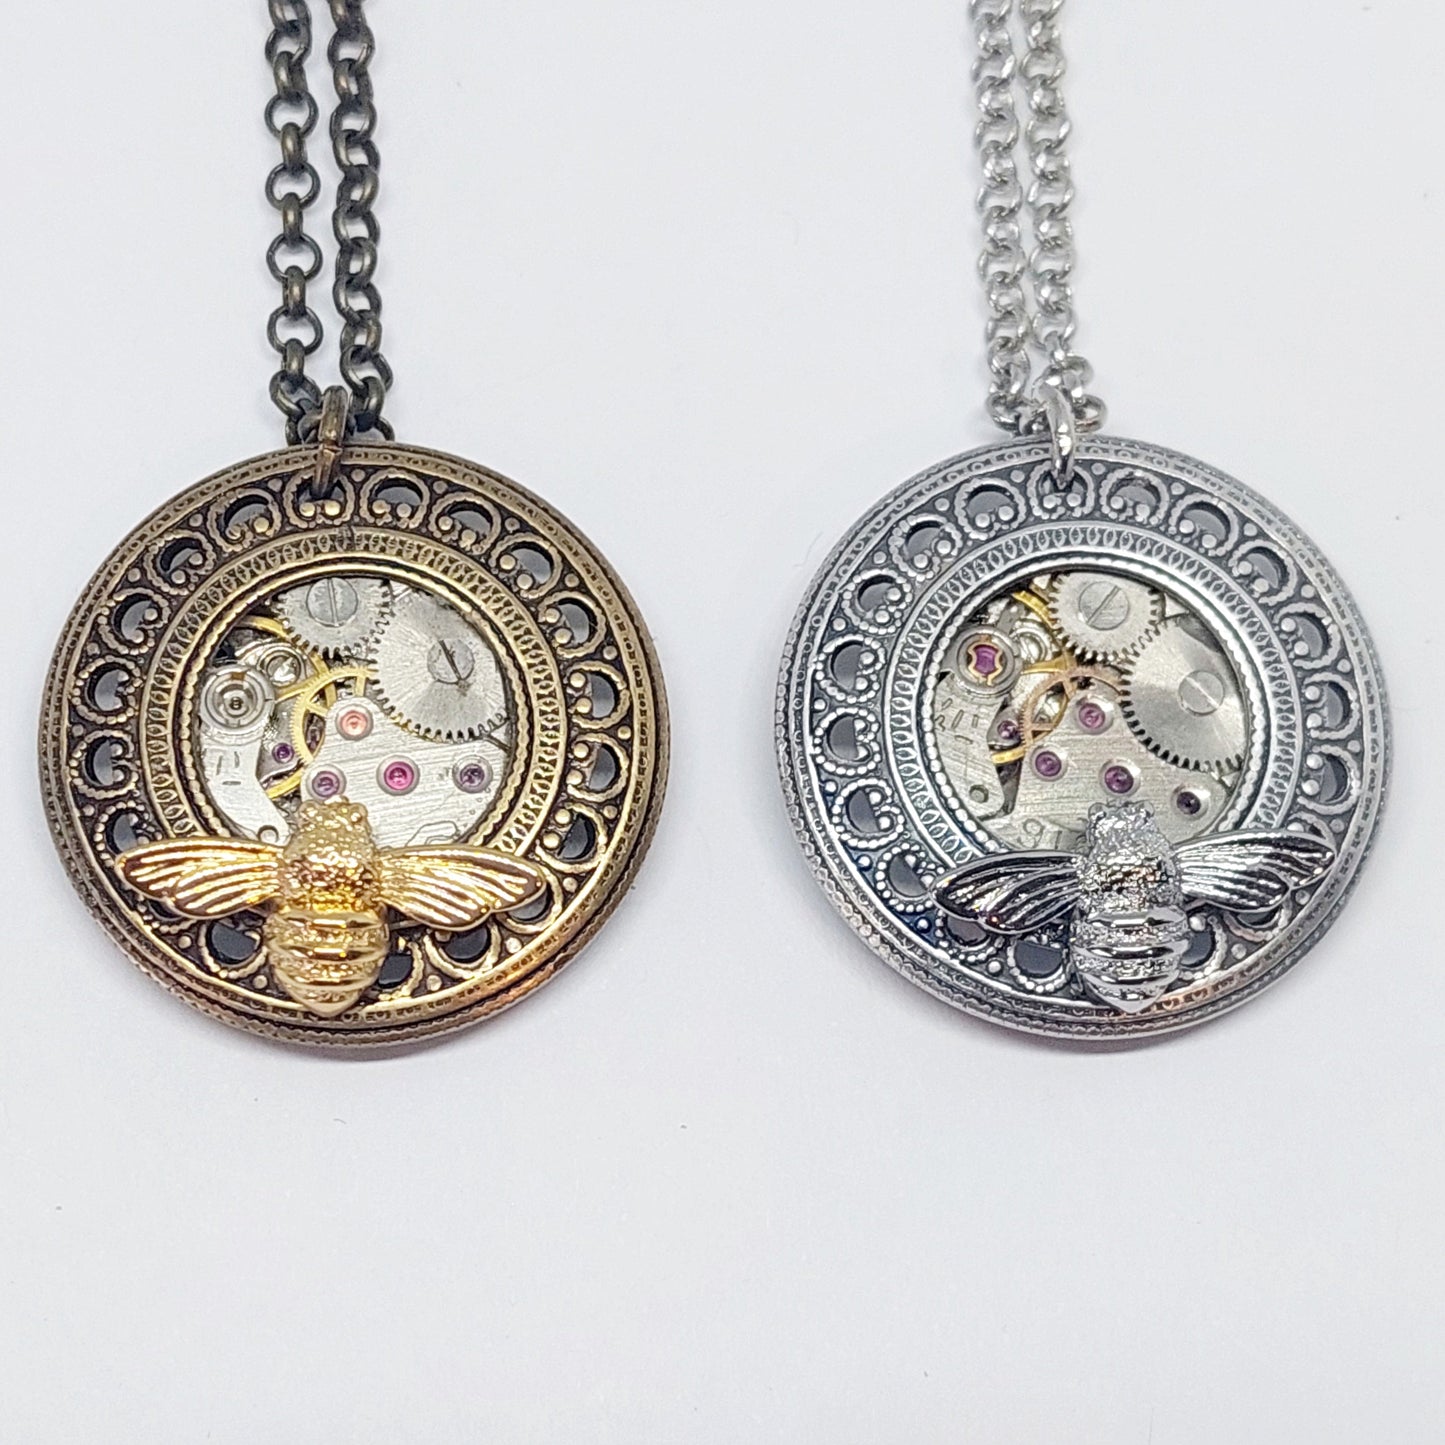 Timepiece Filigree Porthole Pendant with Bee - Brass or Silver